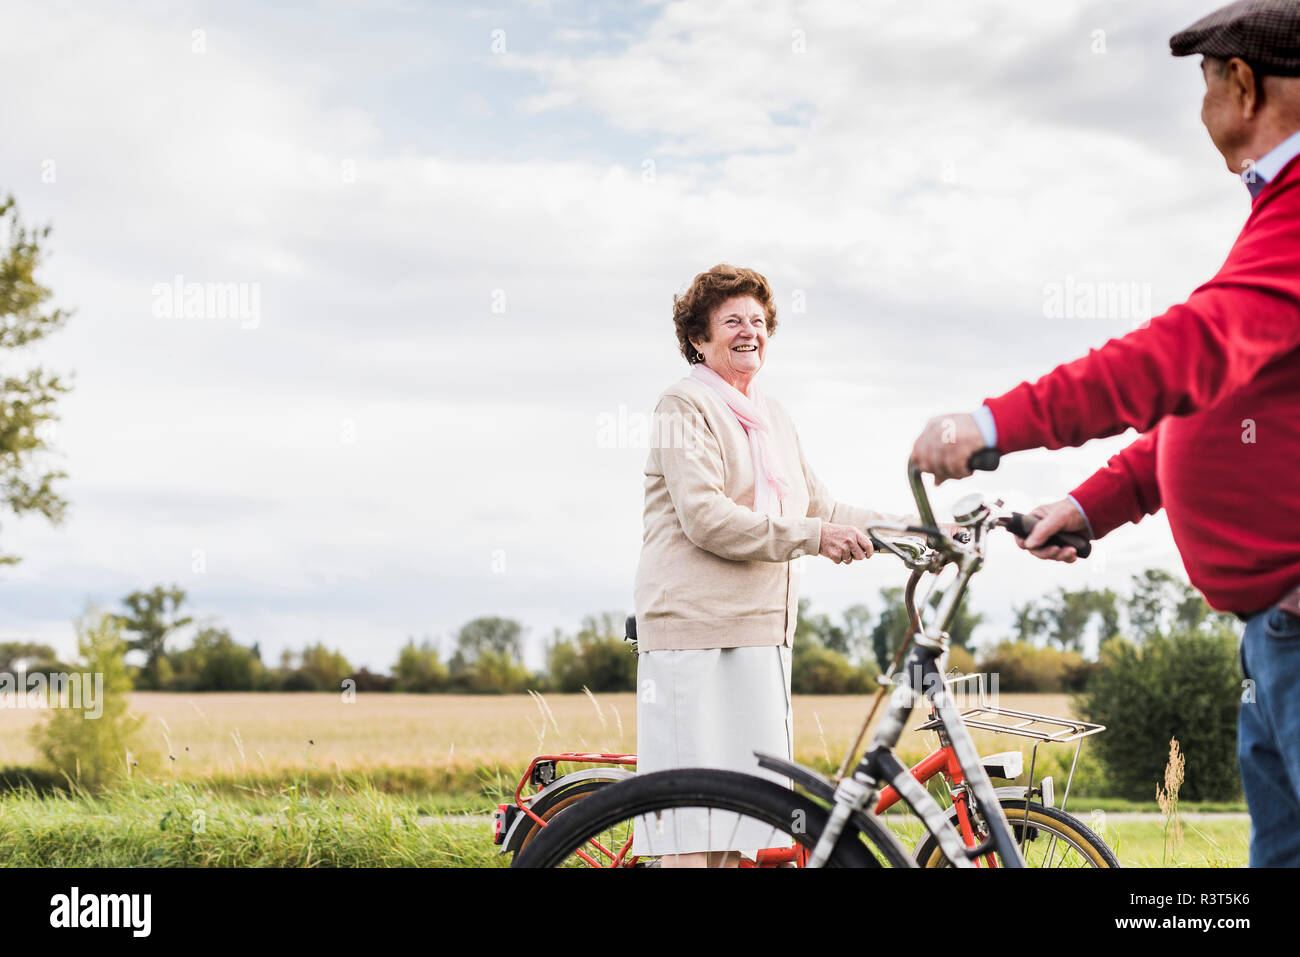 Senior man and woman with bicycles meeting in rural landscape Stock Photo